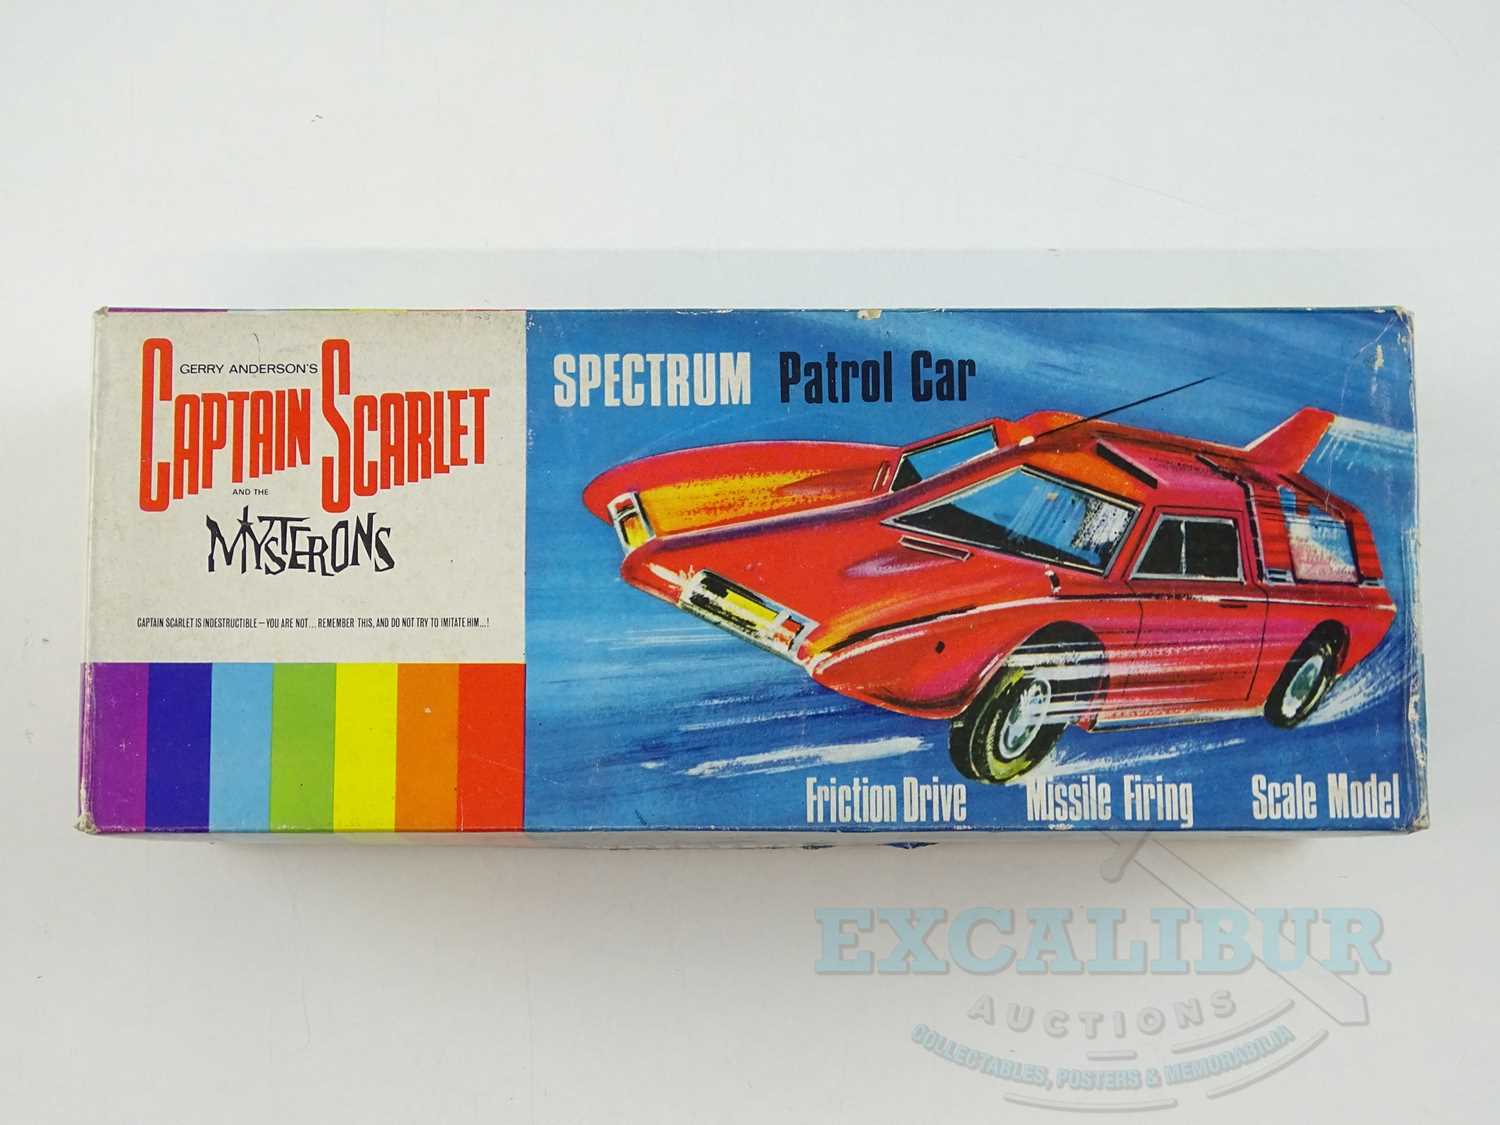 A CENTURY 21 TOYS Gerry Anderson 'Captain Scarlet' friction driven Spectrum Patrol Car in original - Image 2 of 18